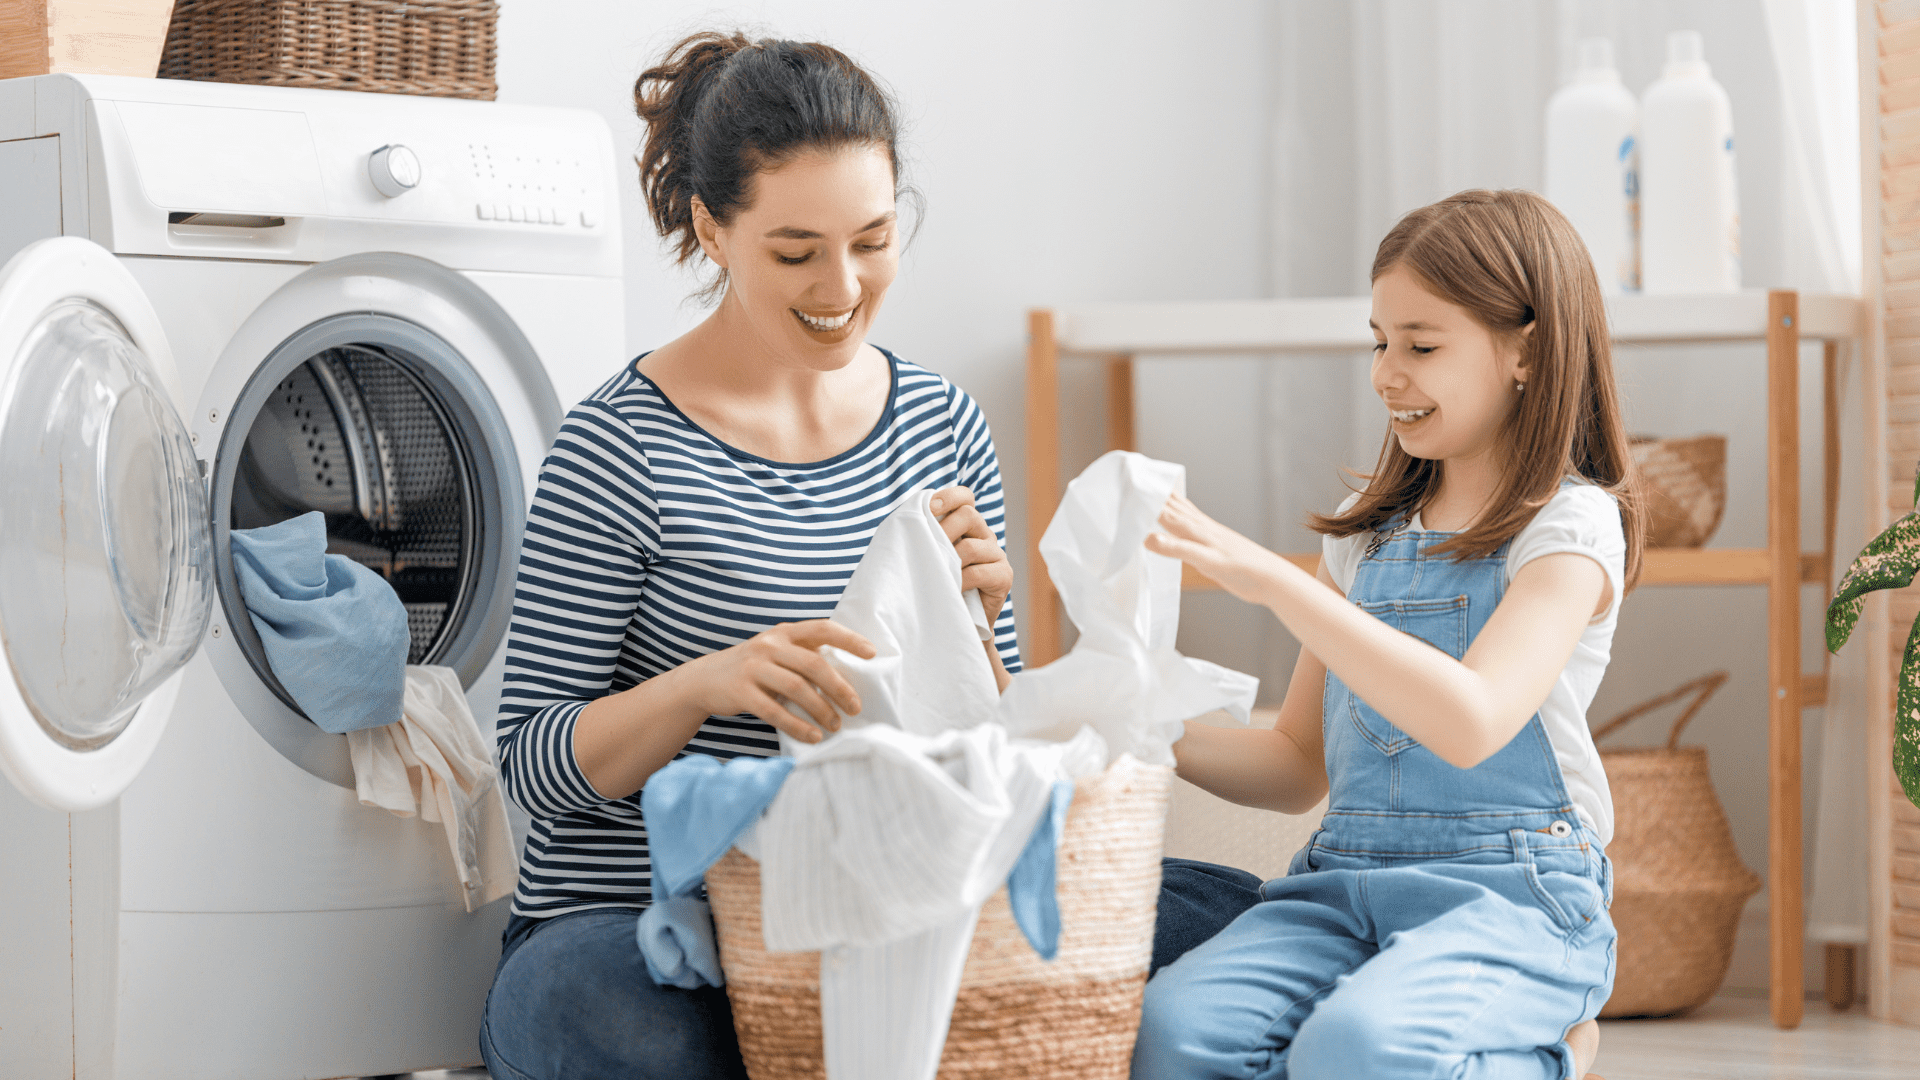 For National Laundry Day 2022, shop these items from